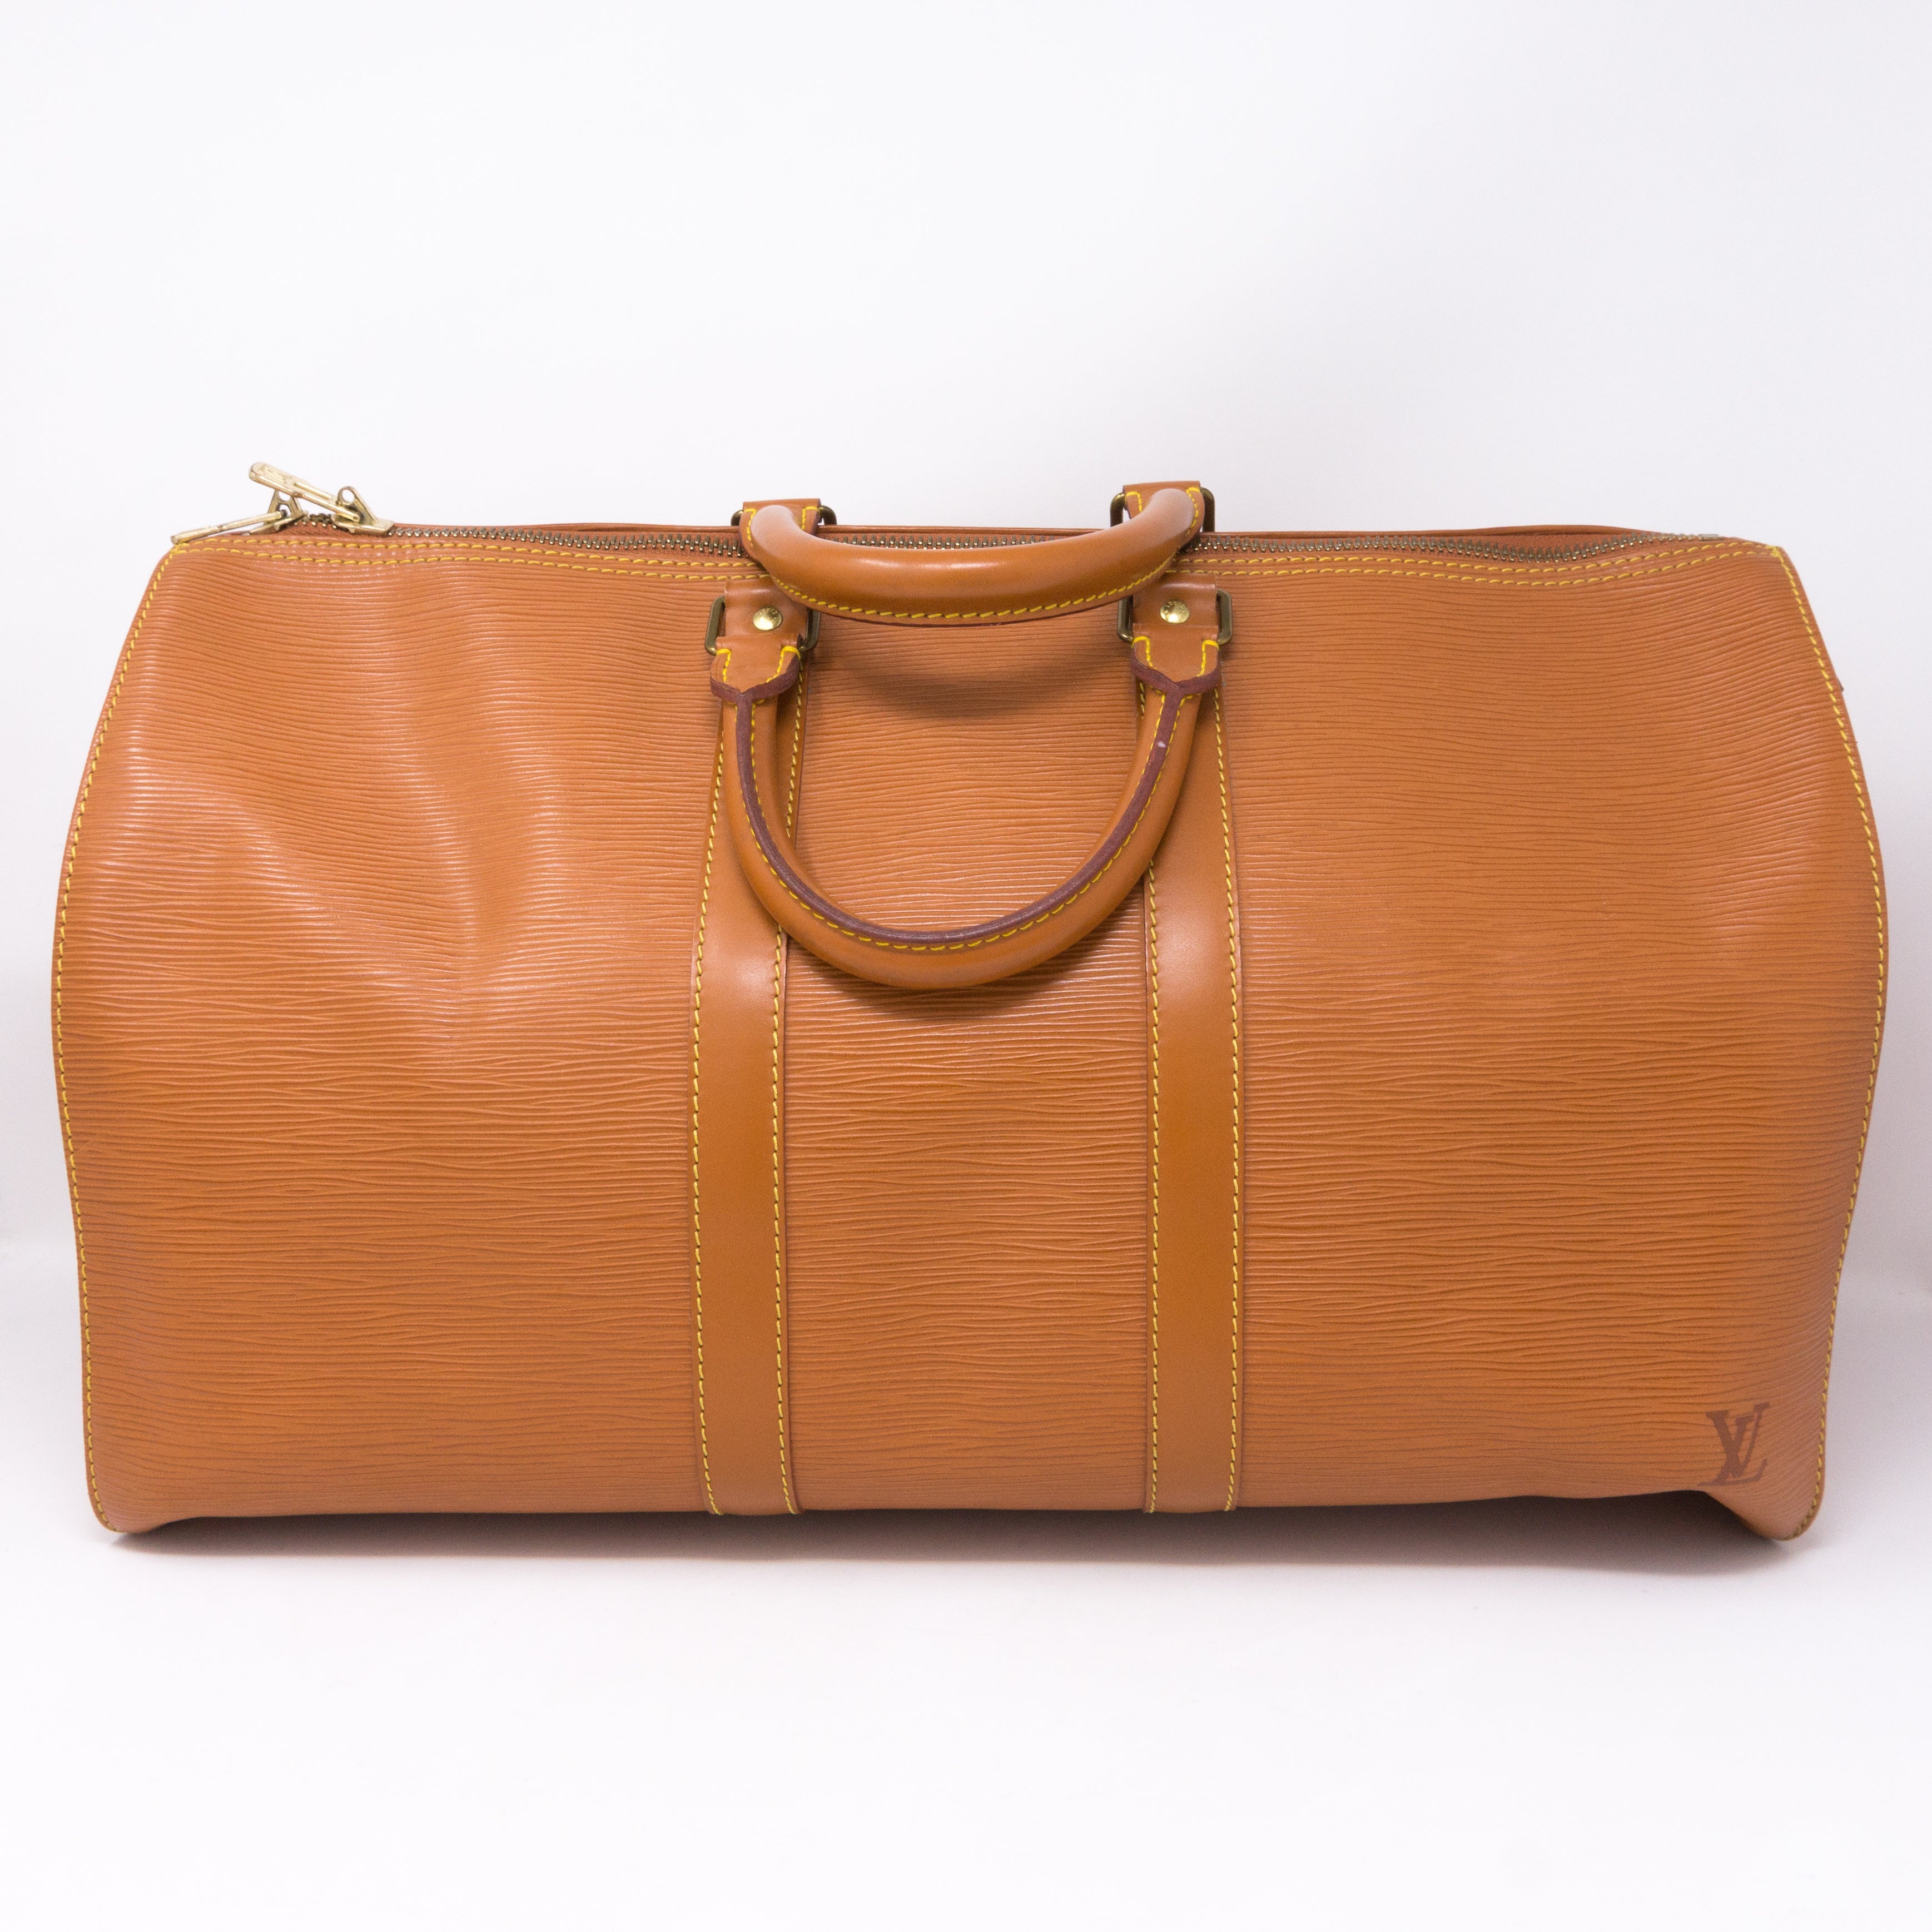 Modified Louis Vuitton Keepall 45 in Winnipeg Sable Epi Leather in